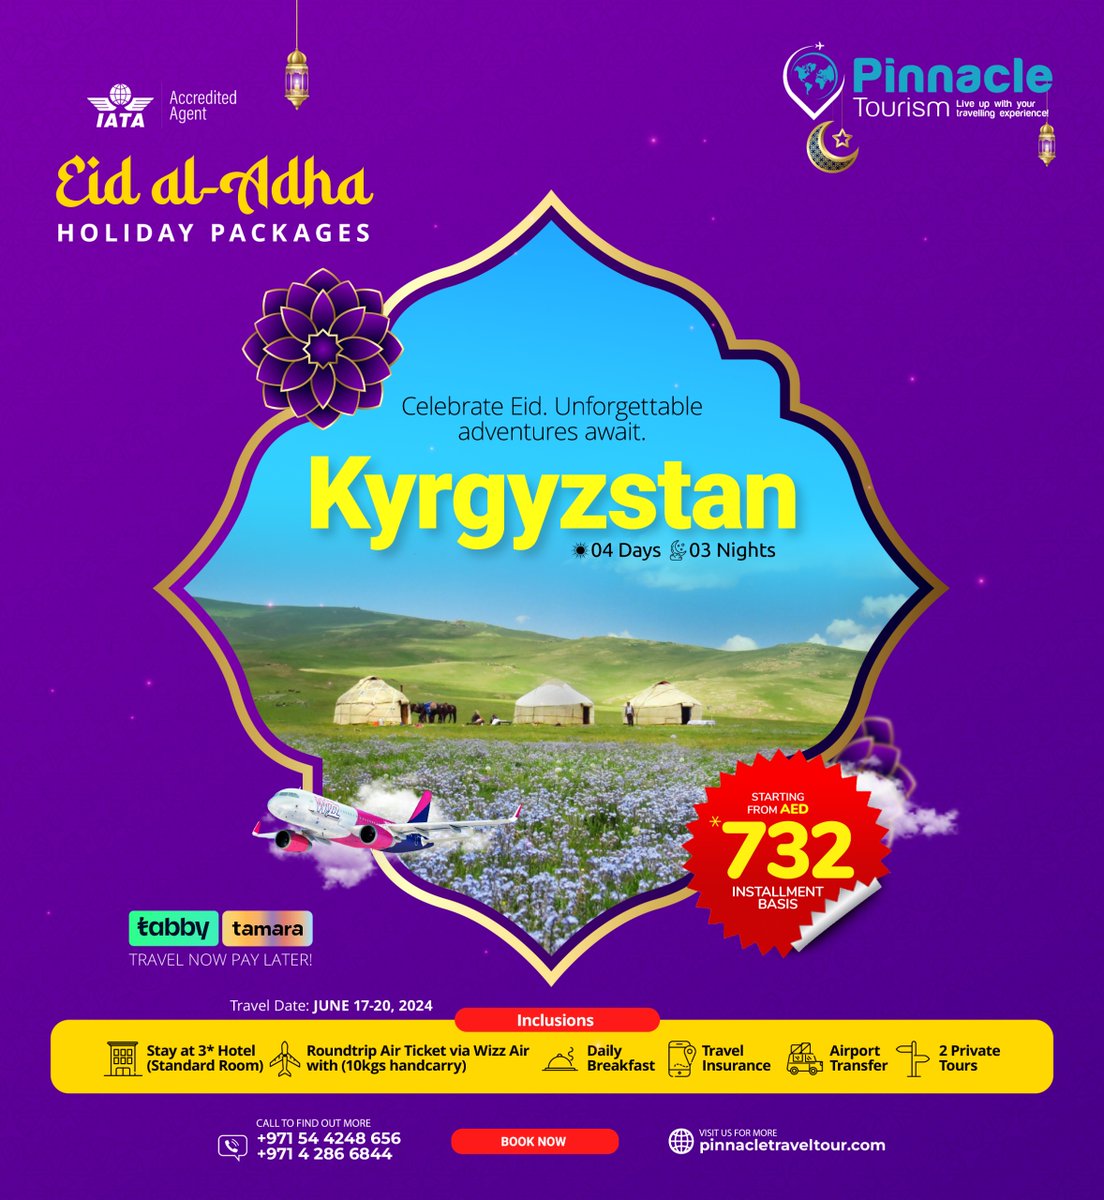 Join us in celebrating Eid Al Adha at Kyrgyzstan for just 732 AED with Tabby! ✨ Immerse yourself in the beauty of Kyrgyzstan. 

☎️042866844
📲0544248656
📧inquiries@pinnacletraveltour.com

#EidAlAdha #Kyrgyzstan #TravelWithTabby #PinnacleTourism #EidGetaway #ExploreKyrgyzstan